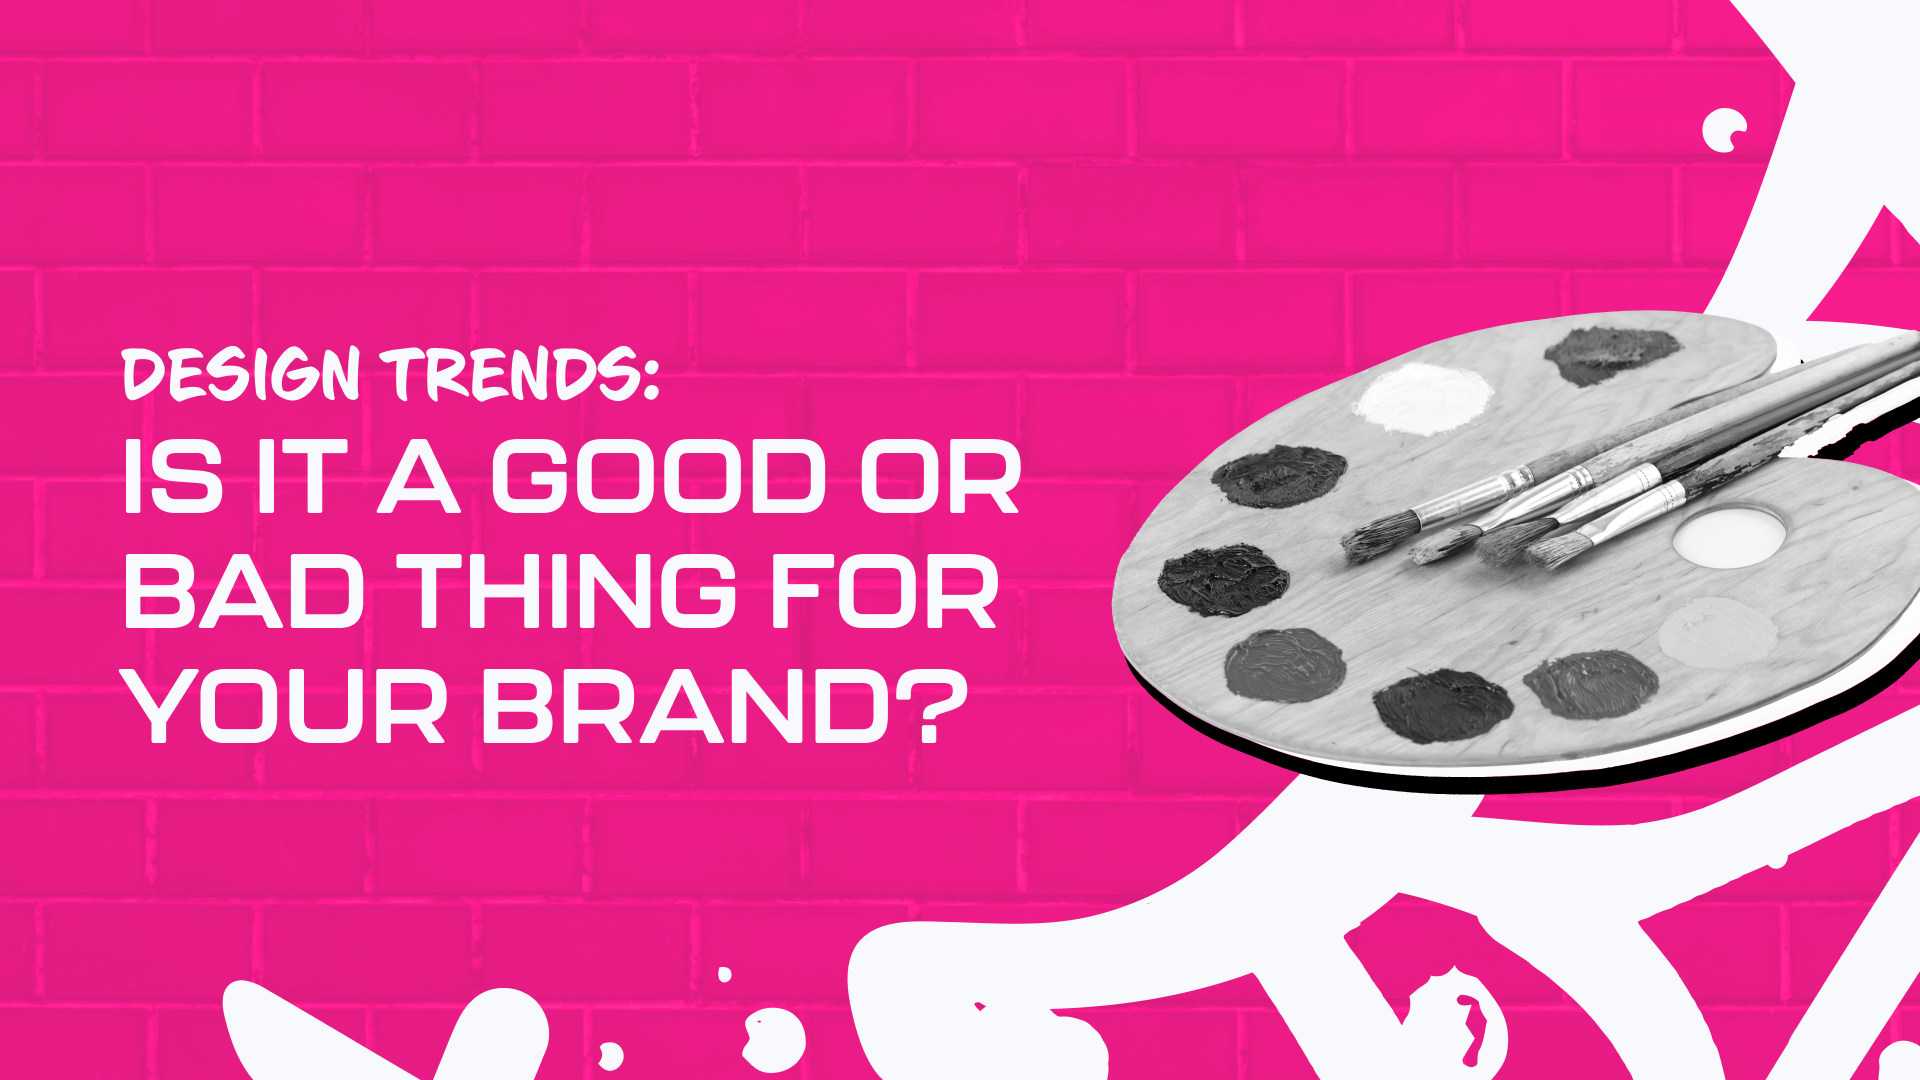 Design Trends: Is It a Good or Bad Thing for Your Brand?